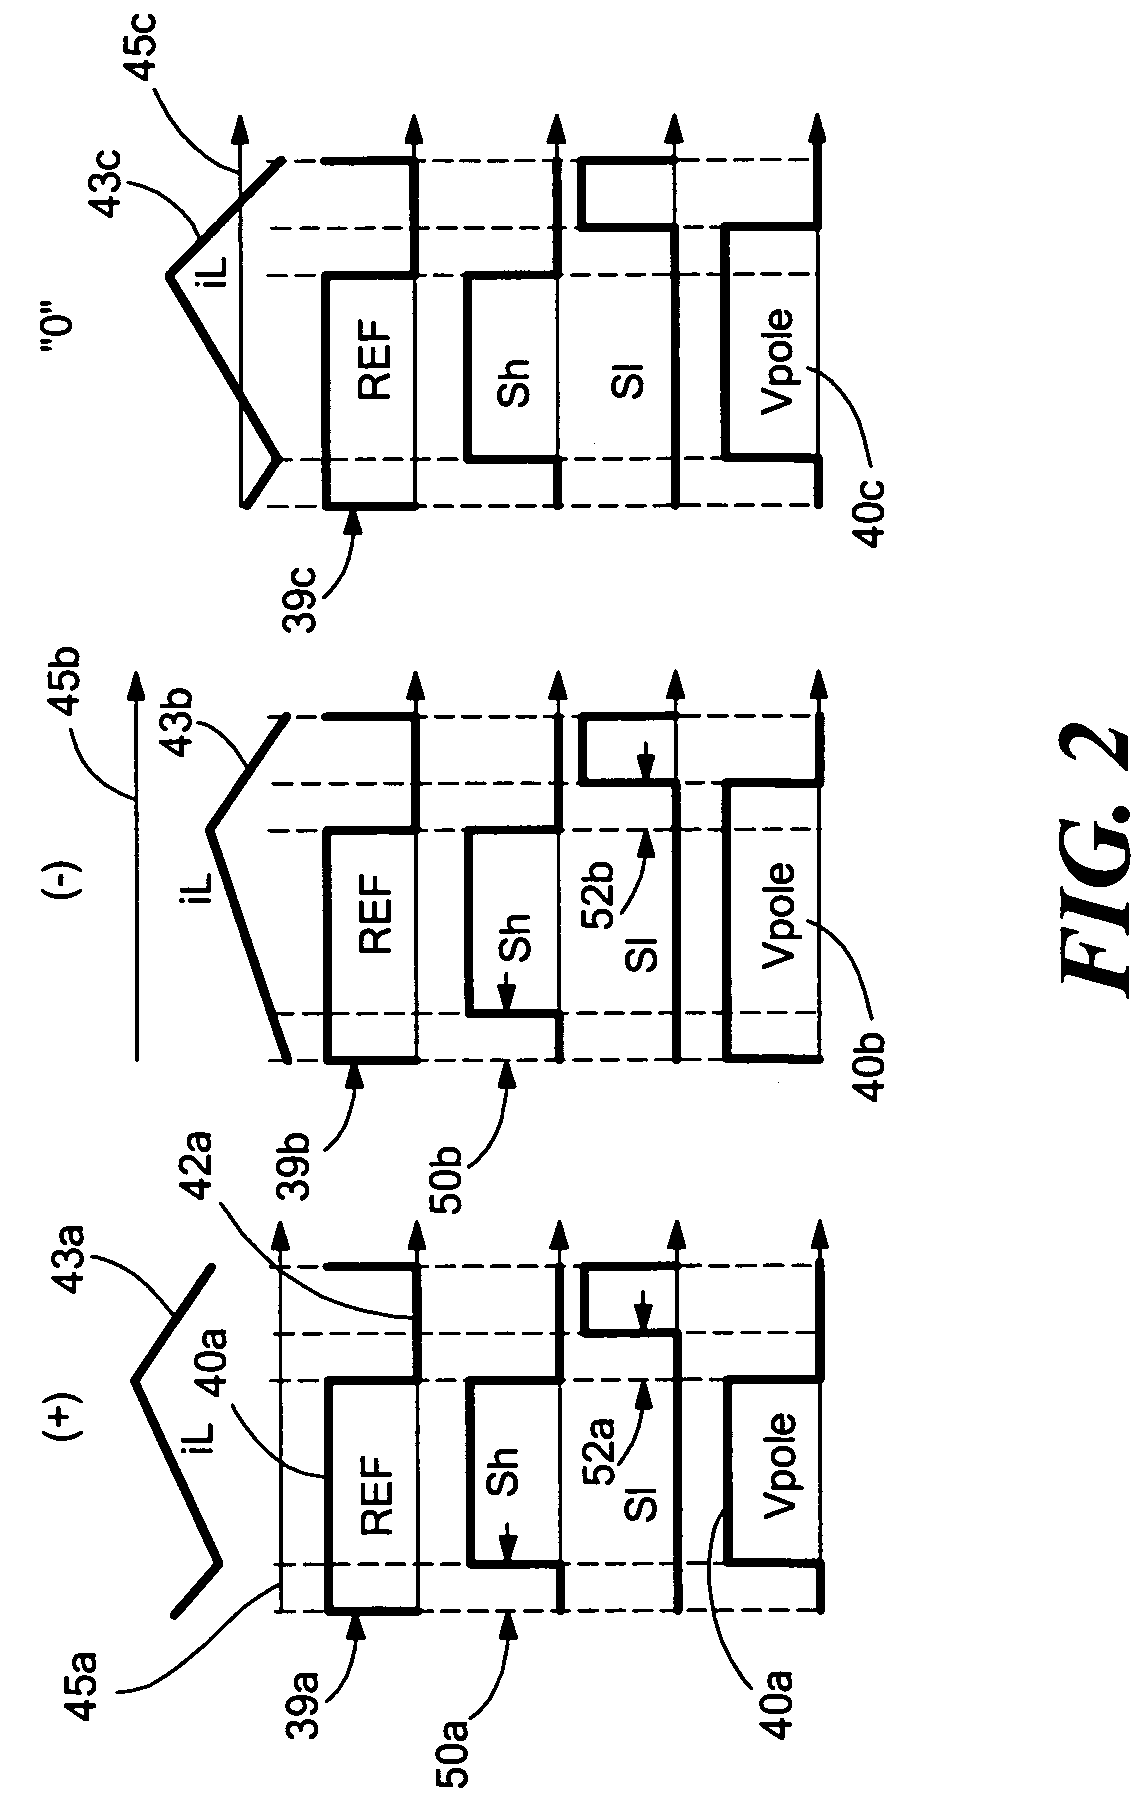 Inverter-filter non-linearity blanking time and zero current clamping compensation system and method